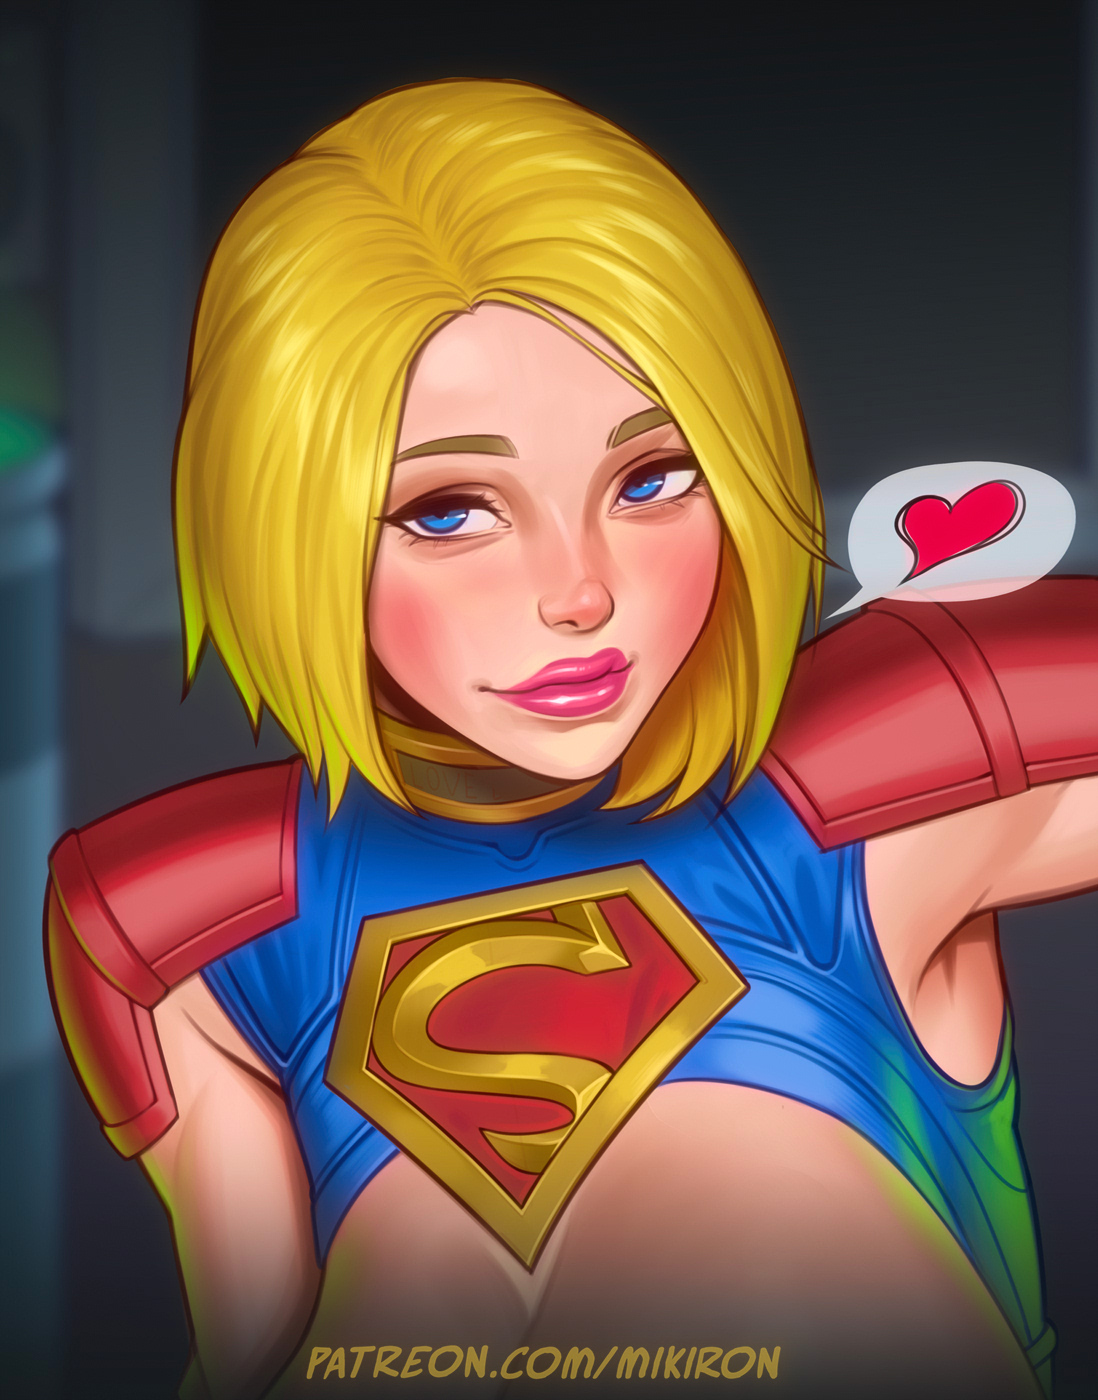 “Supergirl
Extra variations(creampie, futa and more) : https://t.co...